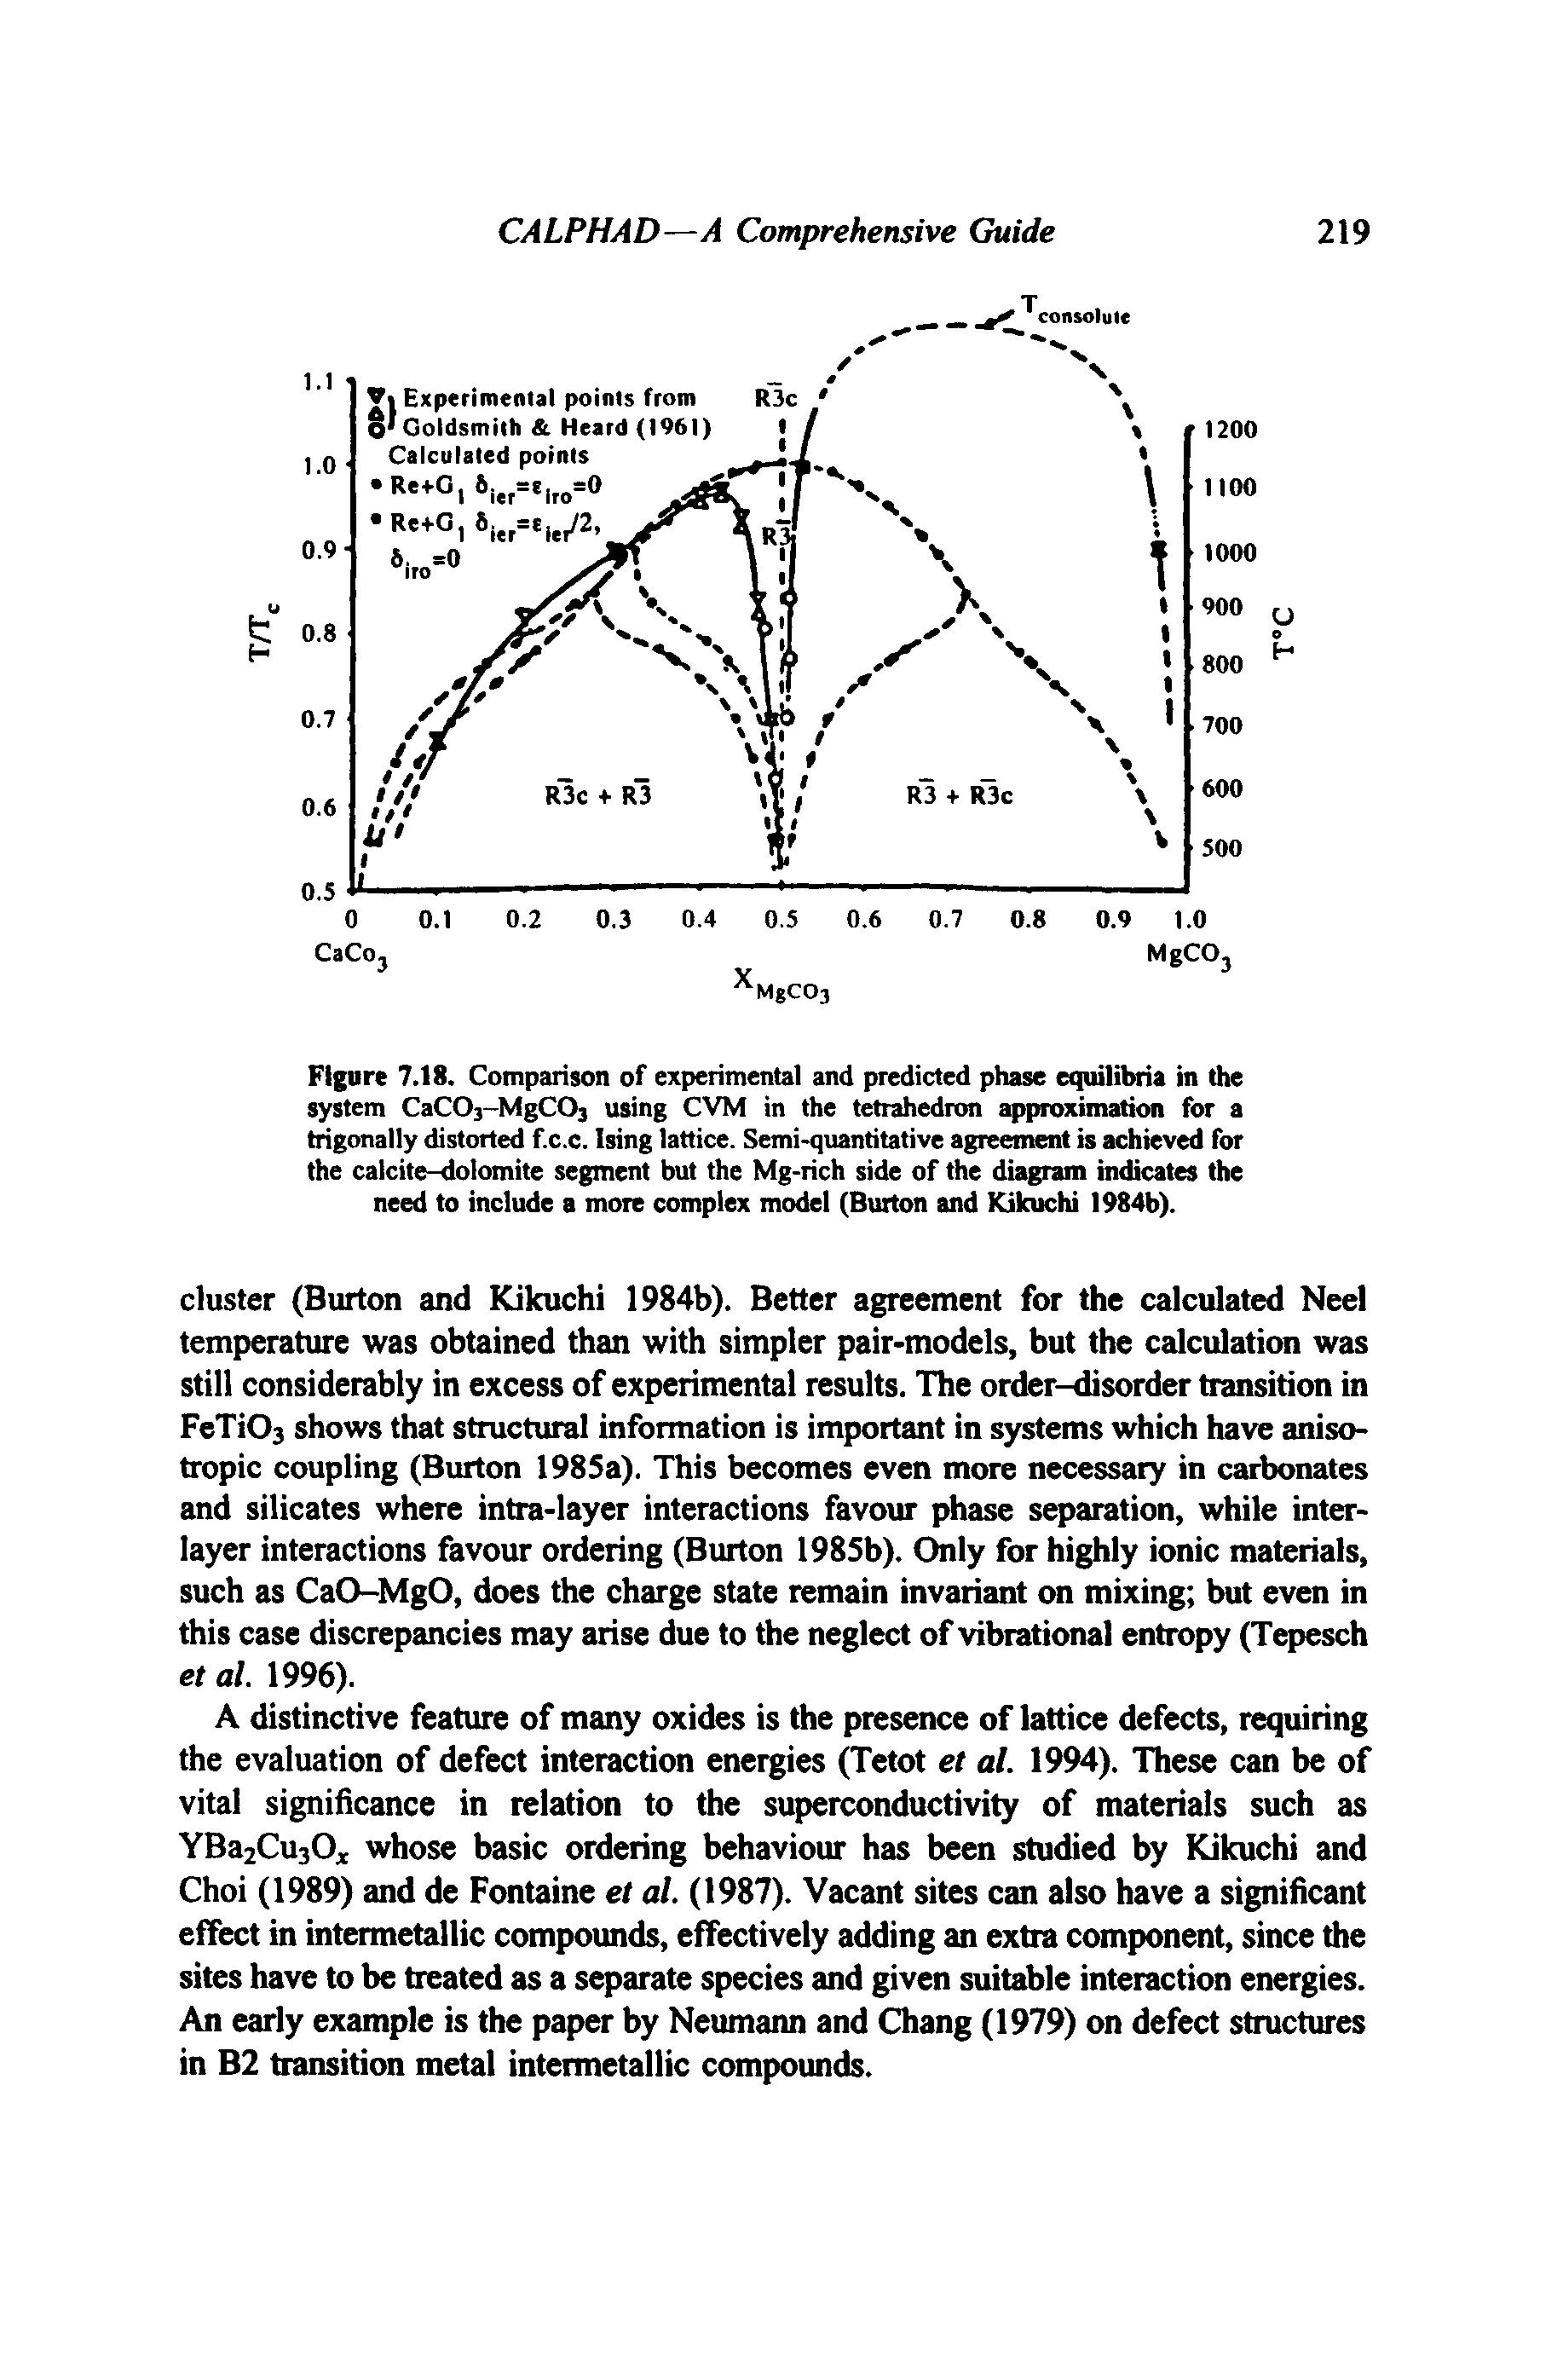 Figure 7.18. Comparison of experimental and predicted phase equilibria in the system CaC03-MgC03 using CVM in the tetrahedron approximation for a trigonally distorted f.c.c. Ising lattice. Semi-quantitative agreement is achieved for the calcite-dolomite segment but the Mg-rich side of the diagram indicates the need to include a more complex model (Burton and Kikuchi 1984b).